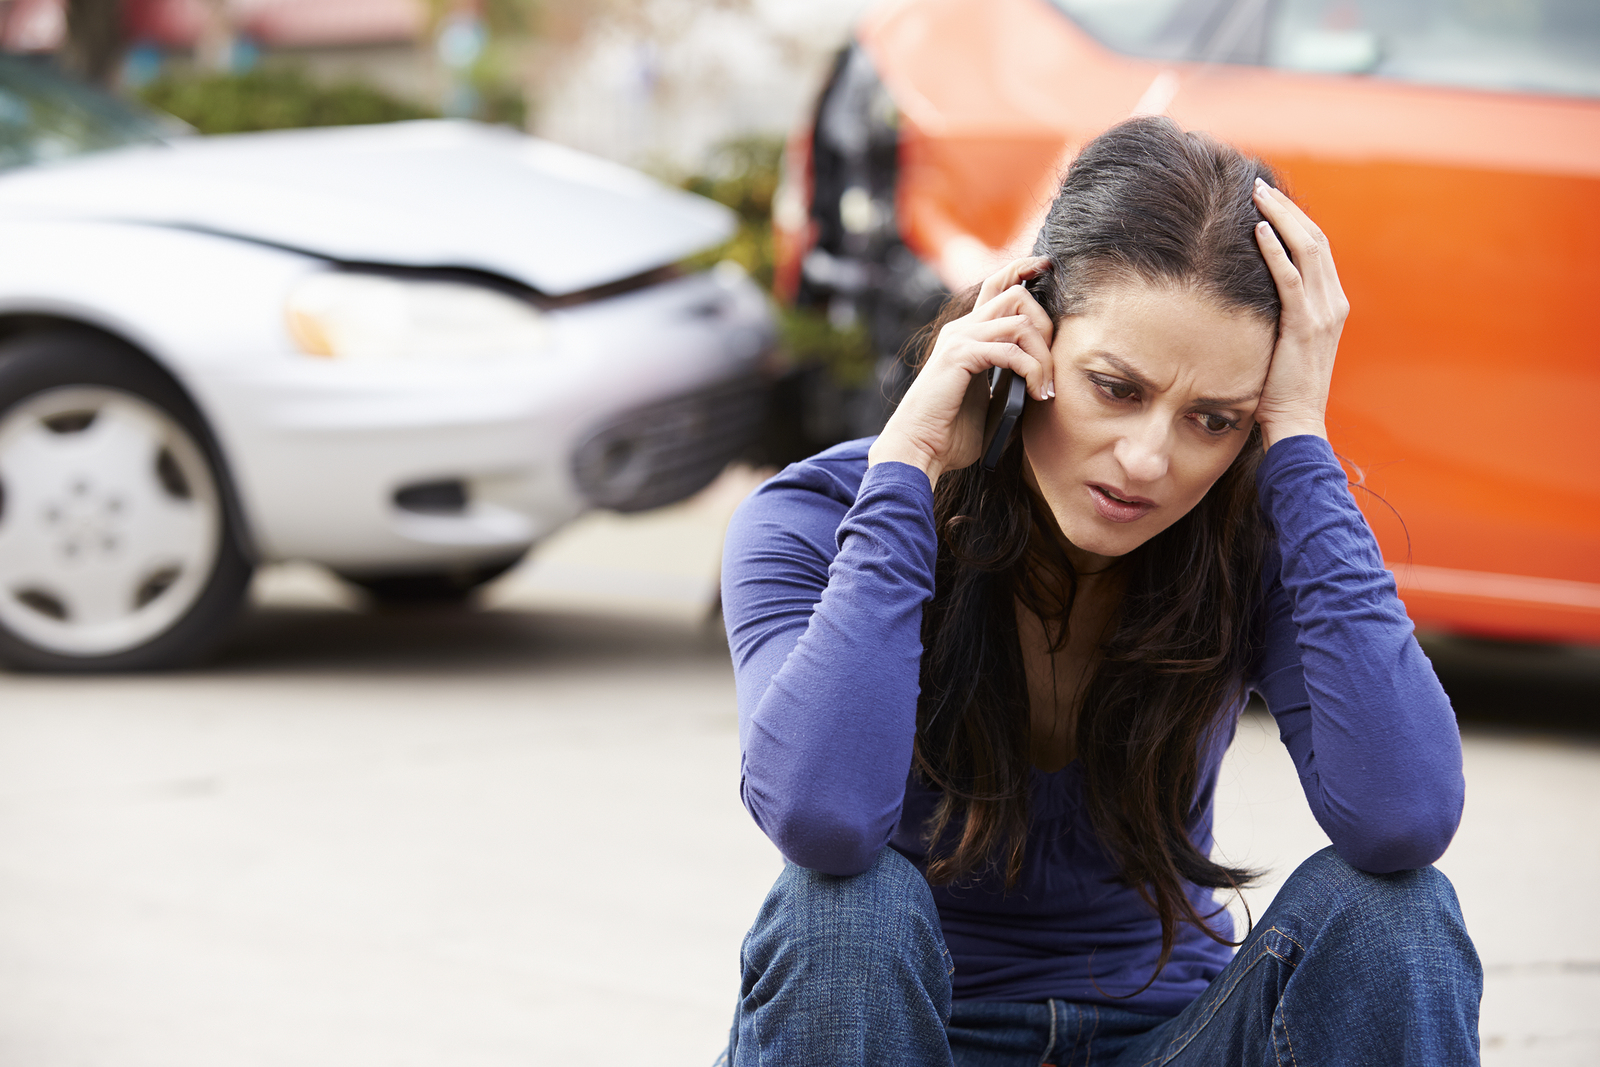 How do I find local car accidents?